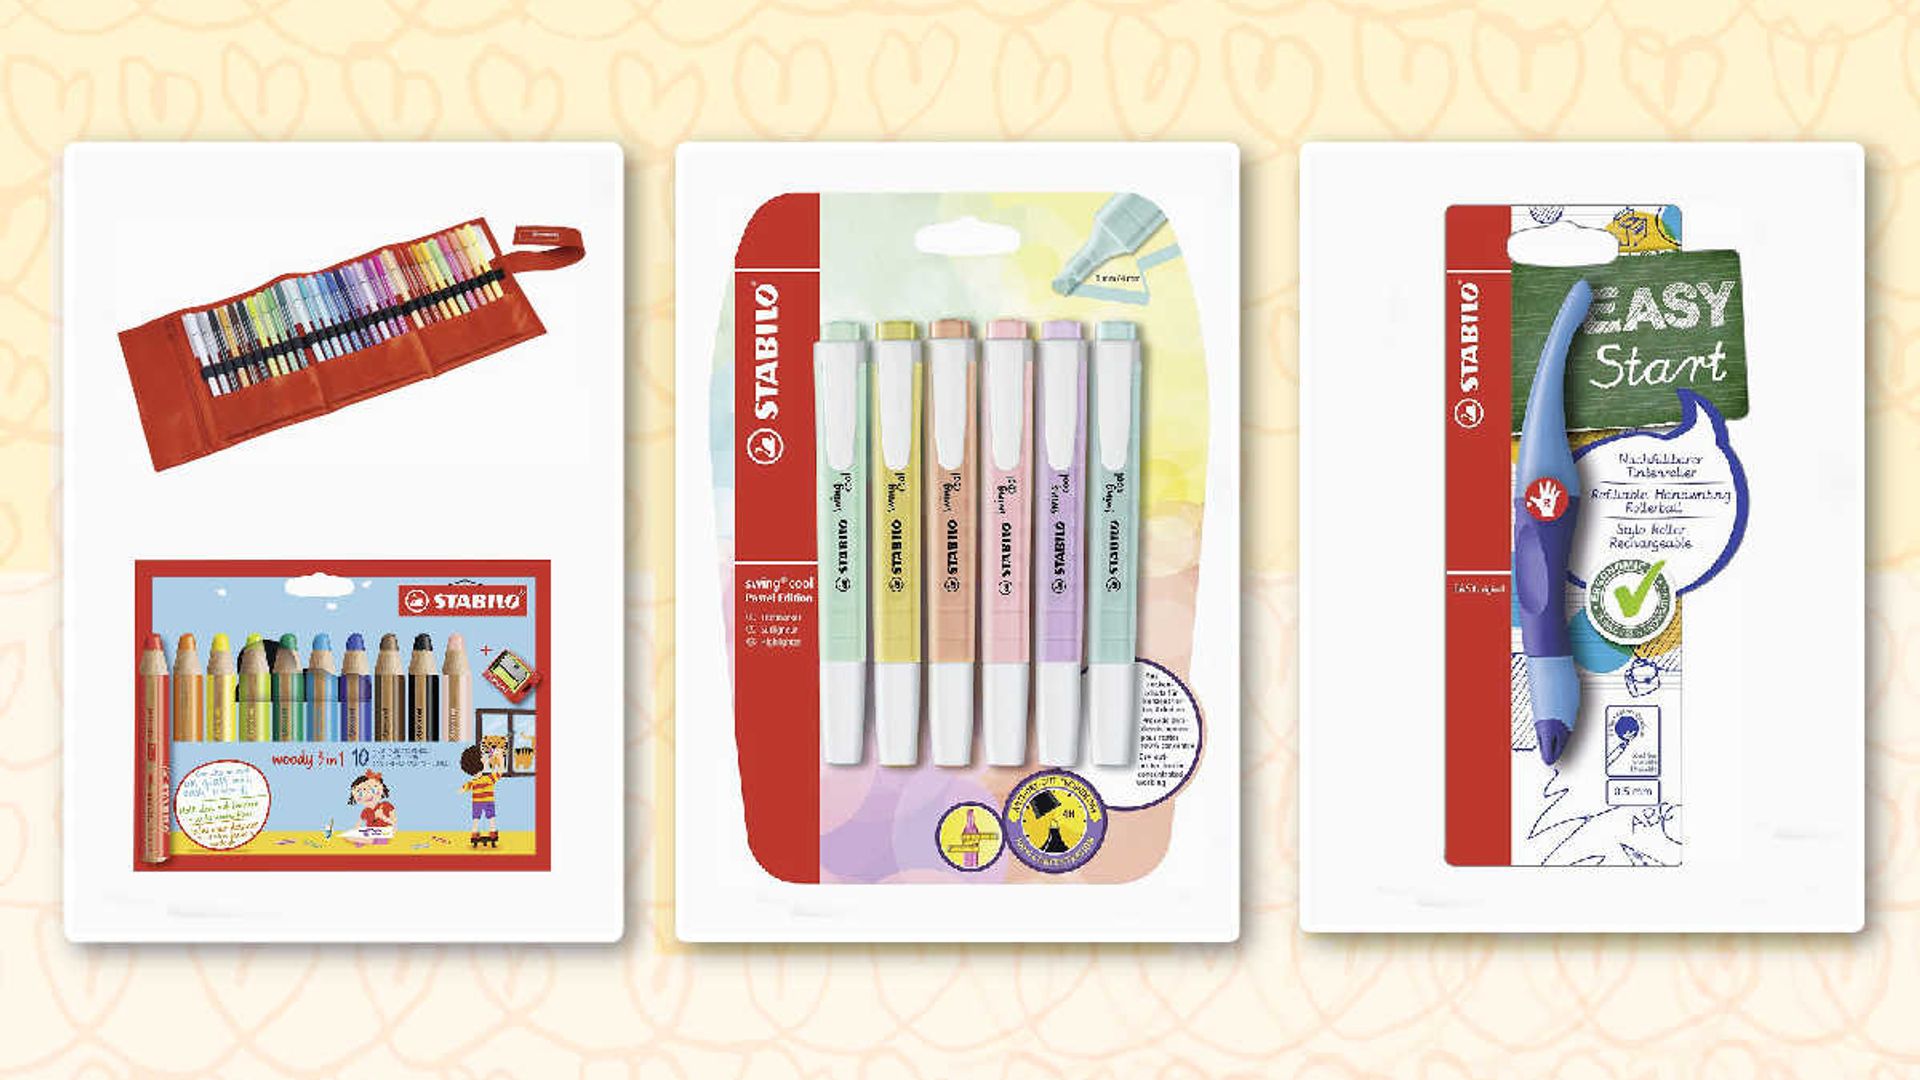 Amazon has a huge sale on cool Stabilo stationery and it's perfect timing for back to school